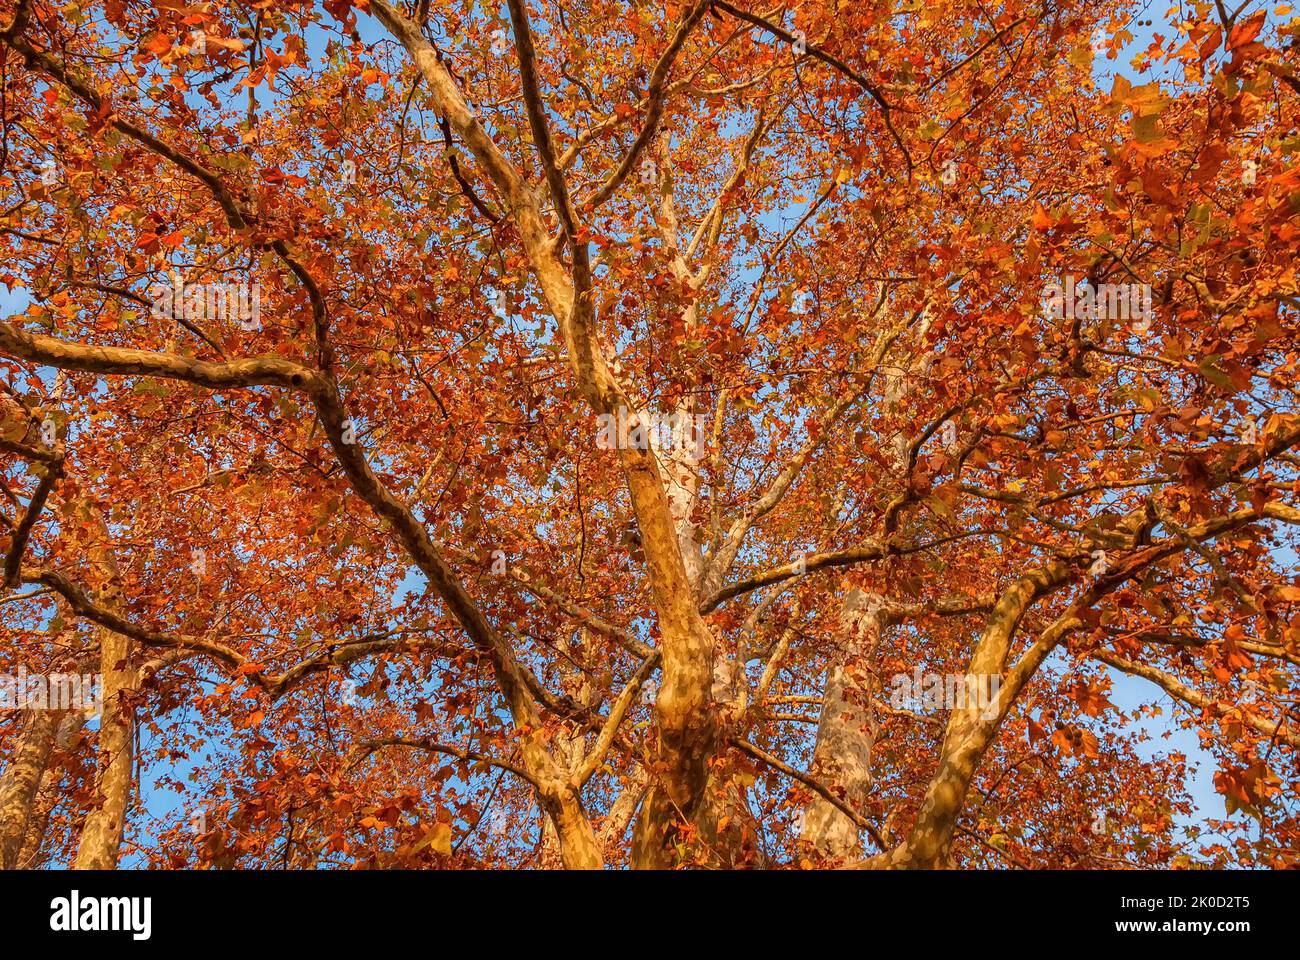 Autumnal and foliage background. Autumn arrives and sycamore leaves turn from brown to red at sunset Stock Photo